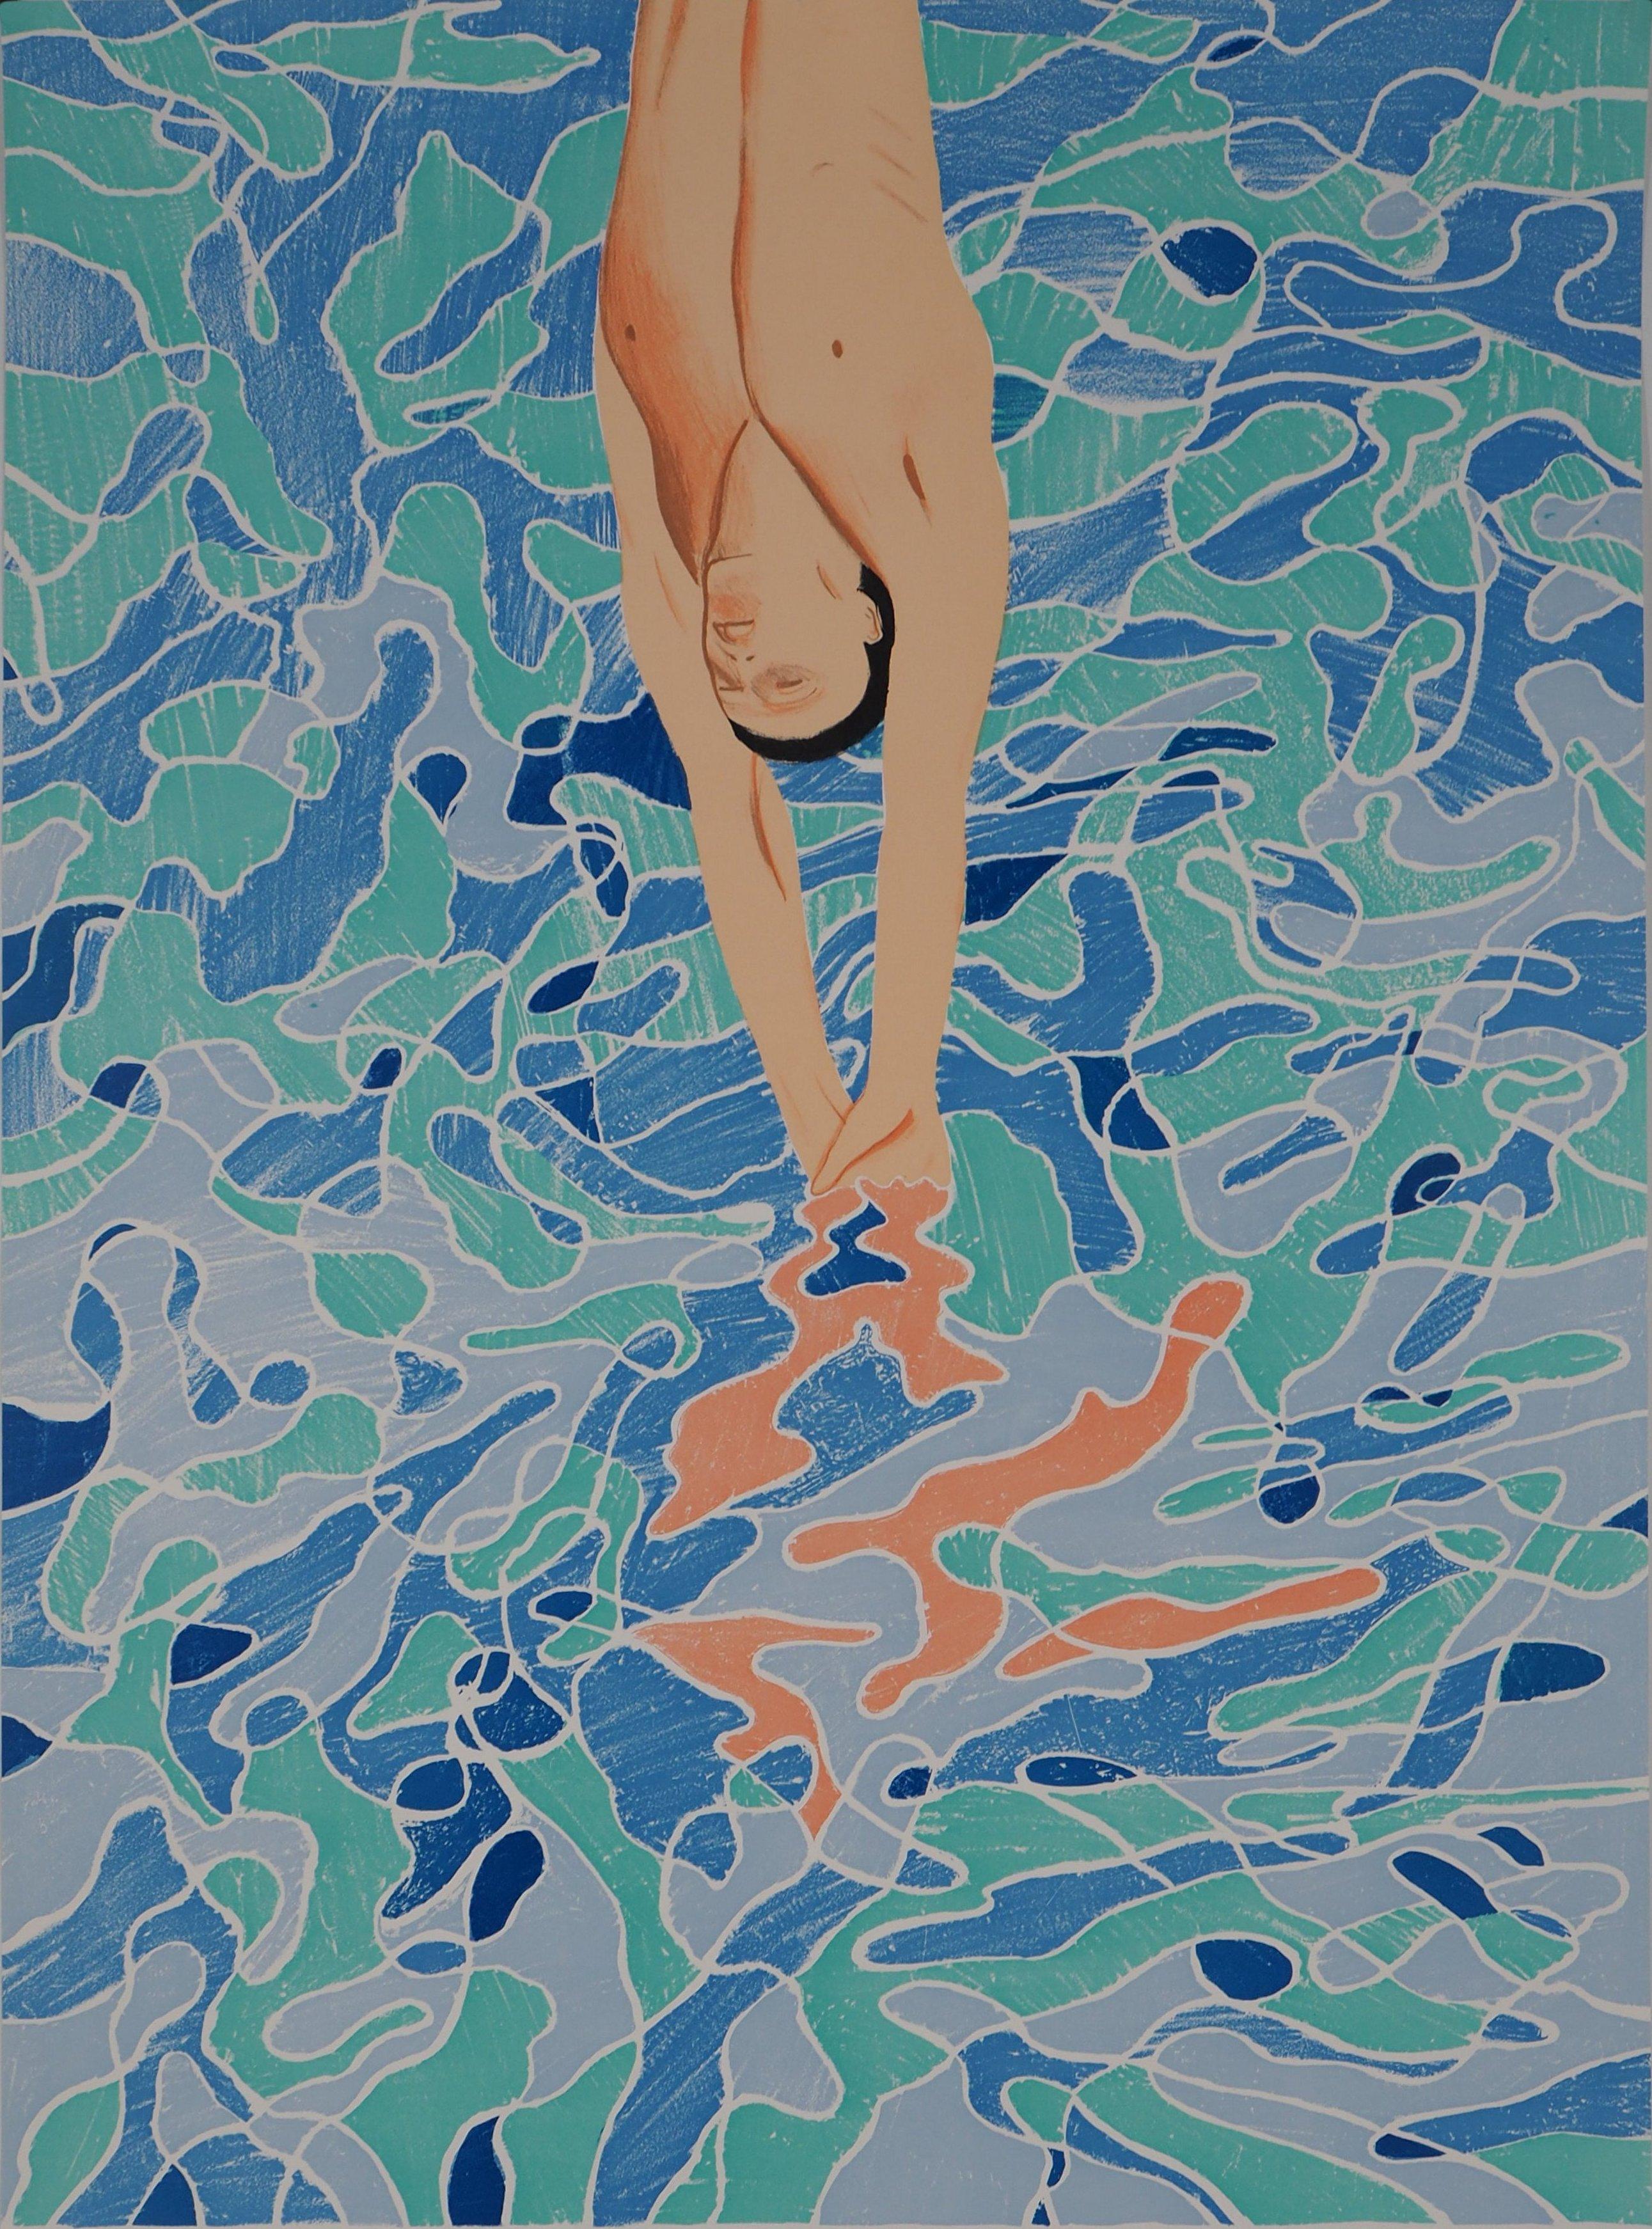 Pool Diver - Lithograph (Olympic Games Munich 1972) - American Modern Print by David Hockney